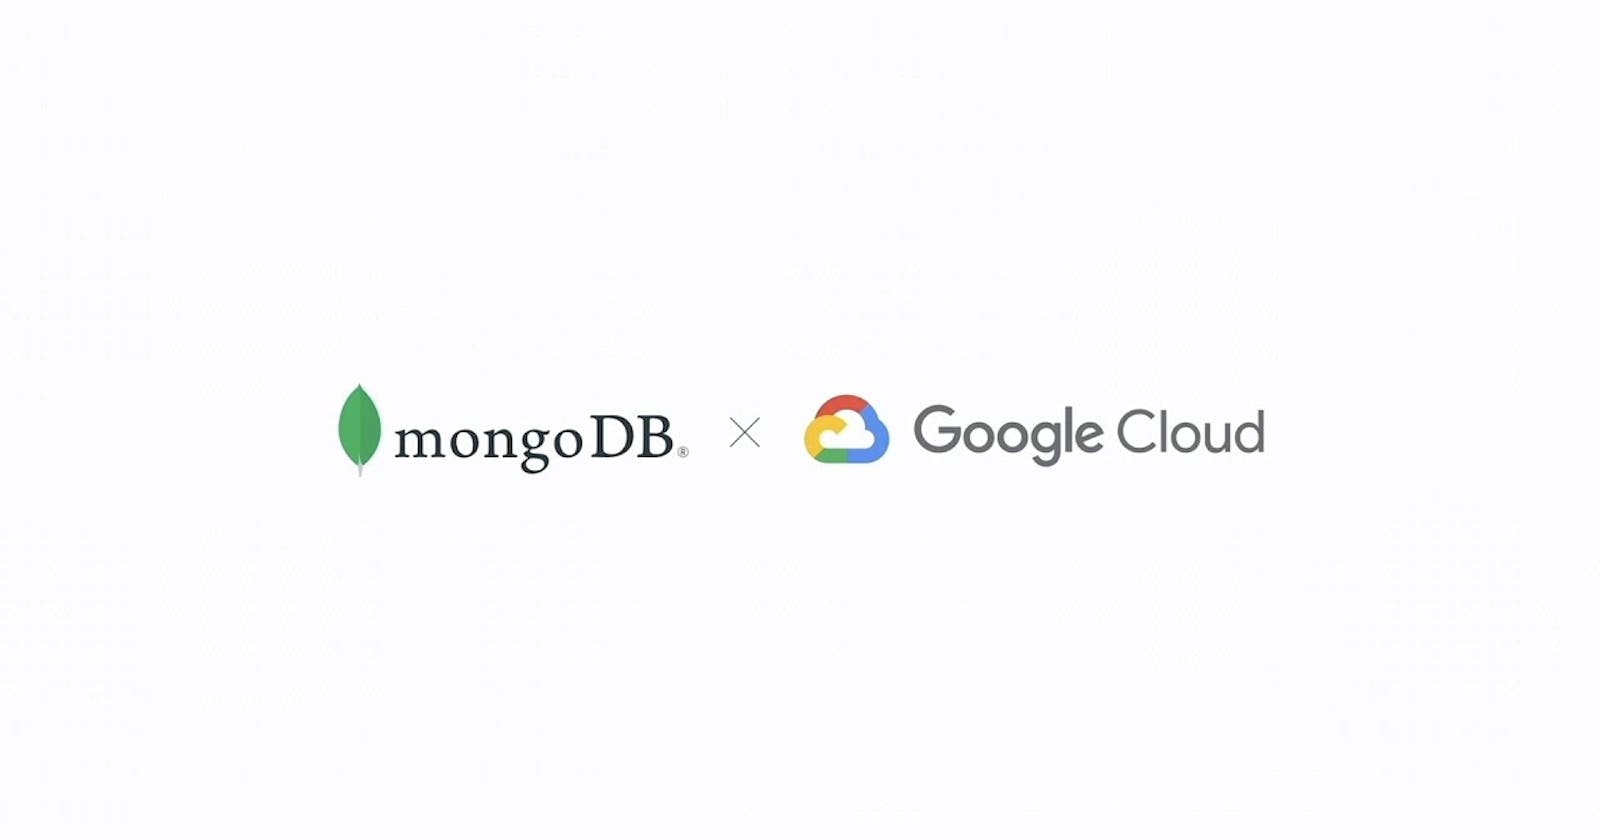 How to create a Deployment file for cloud run and mongo DB Atlas cluster!